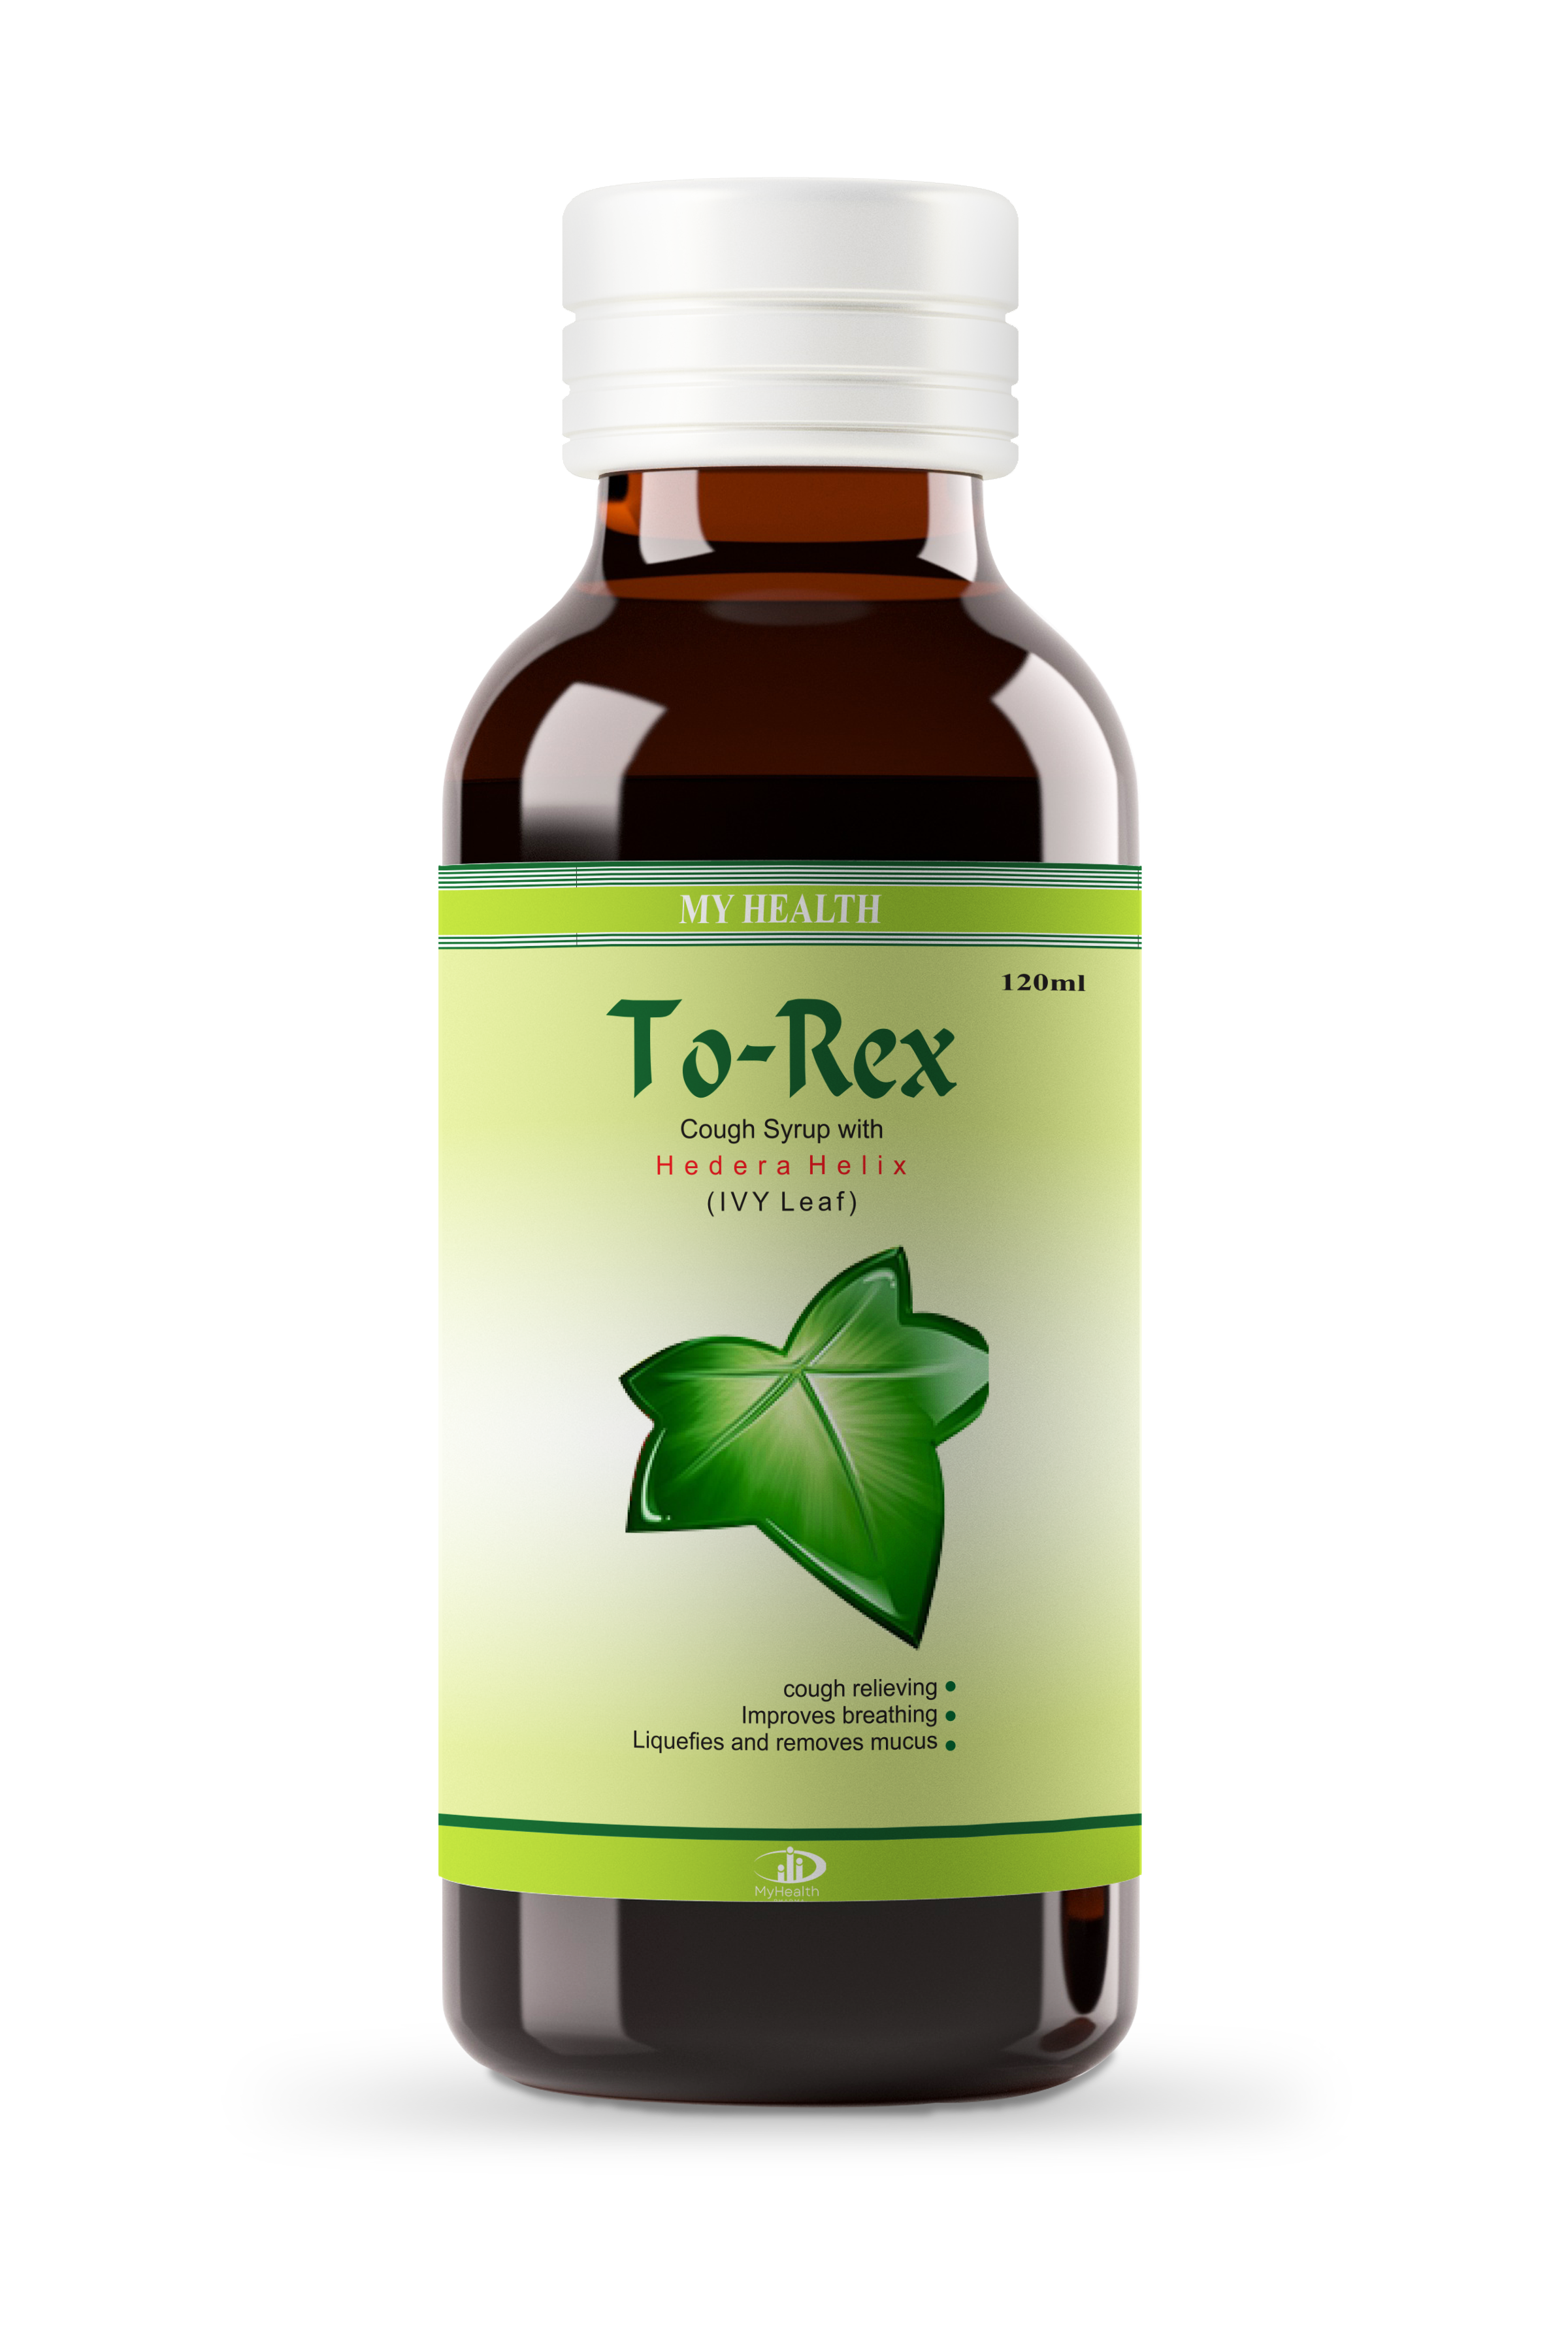 To-Rex Cough Syrup with Hedera Helix